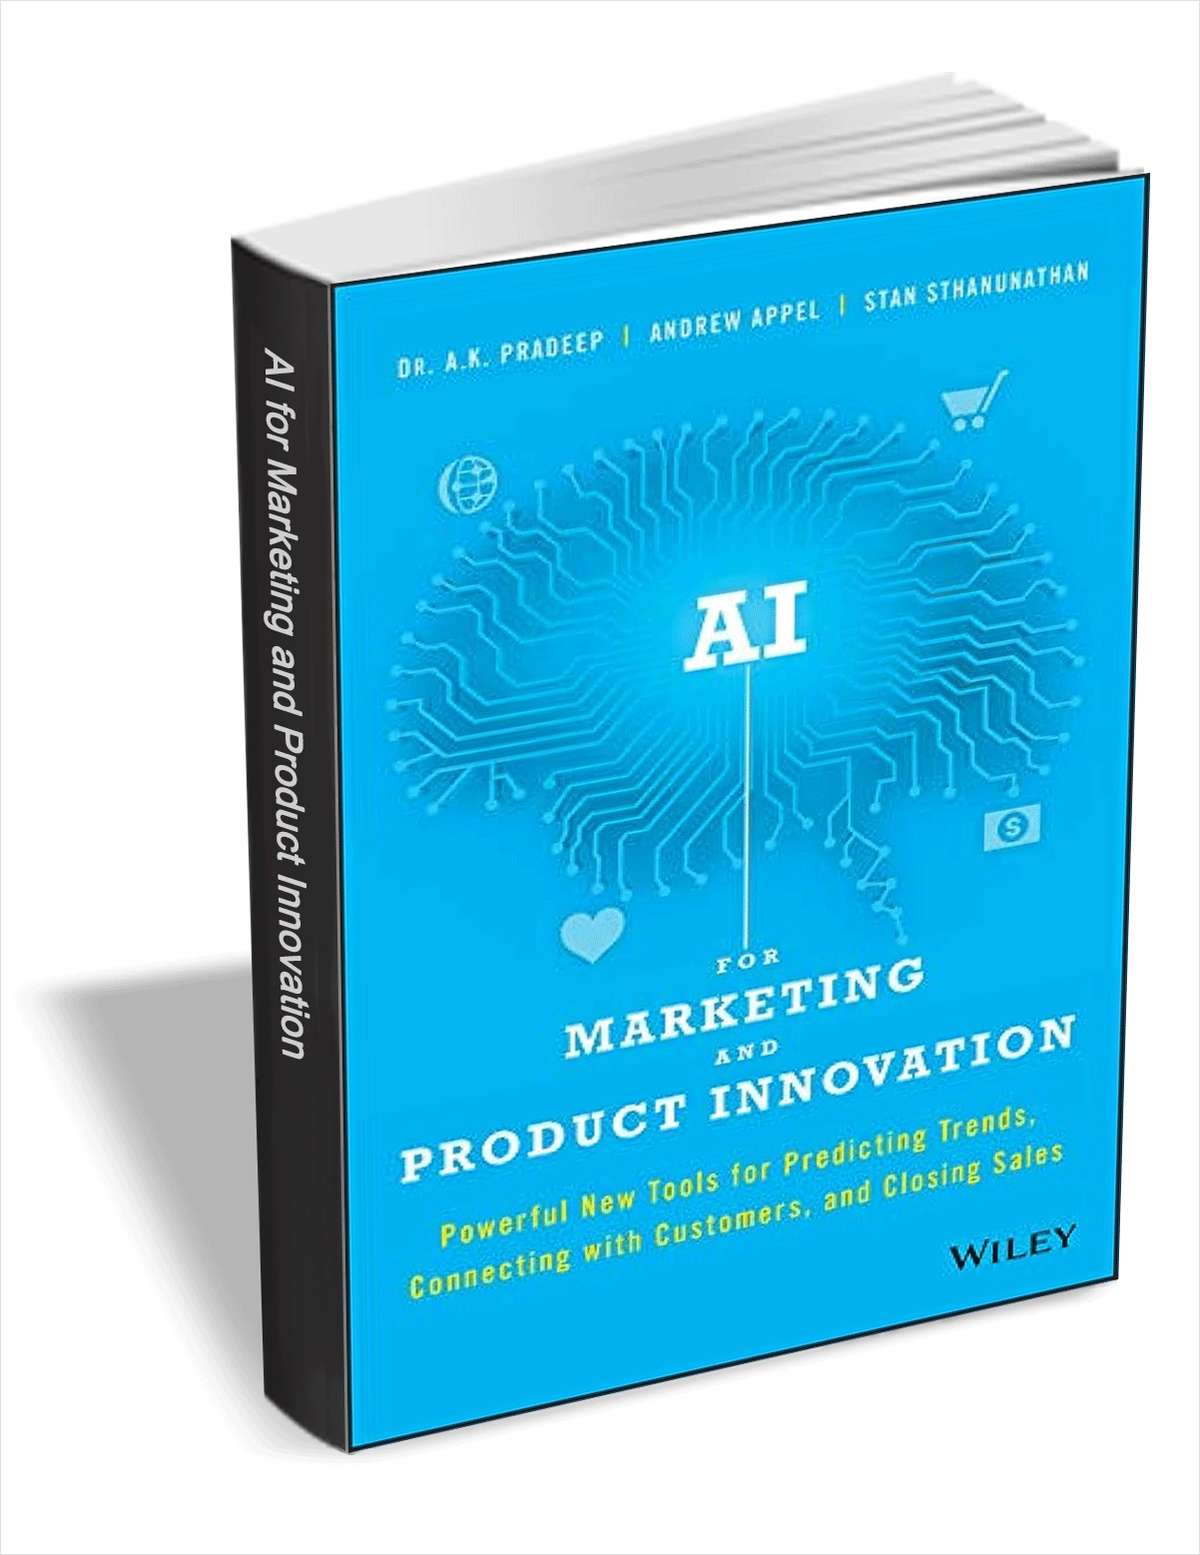 Get 'AI for Marketing and Product Innovation' (worth $17) for FREE